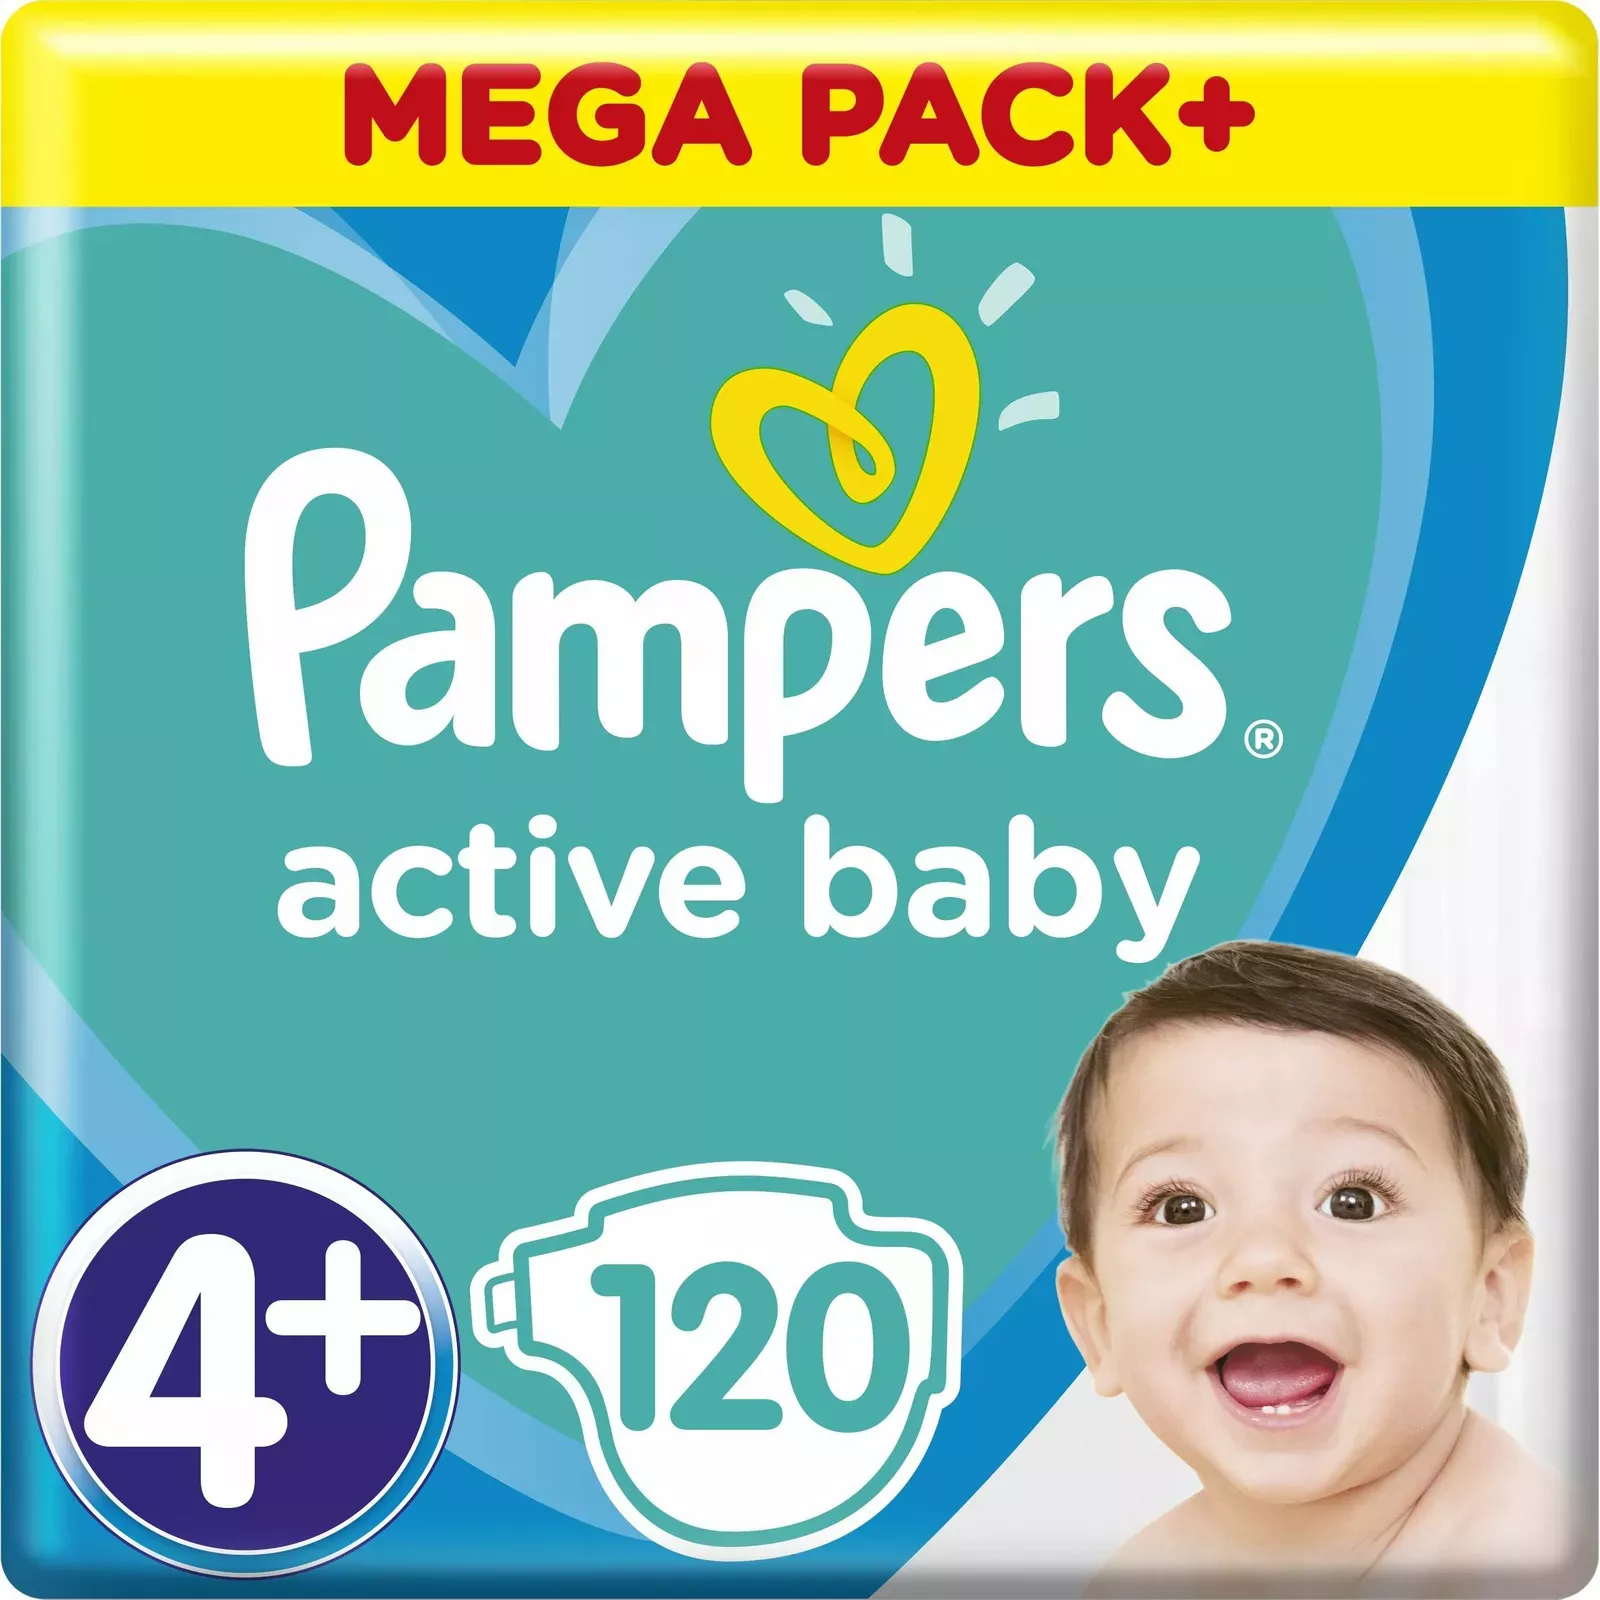 pampers night 3